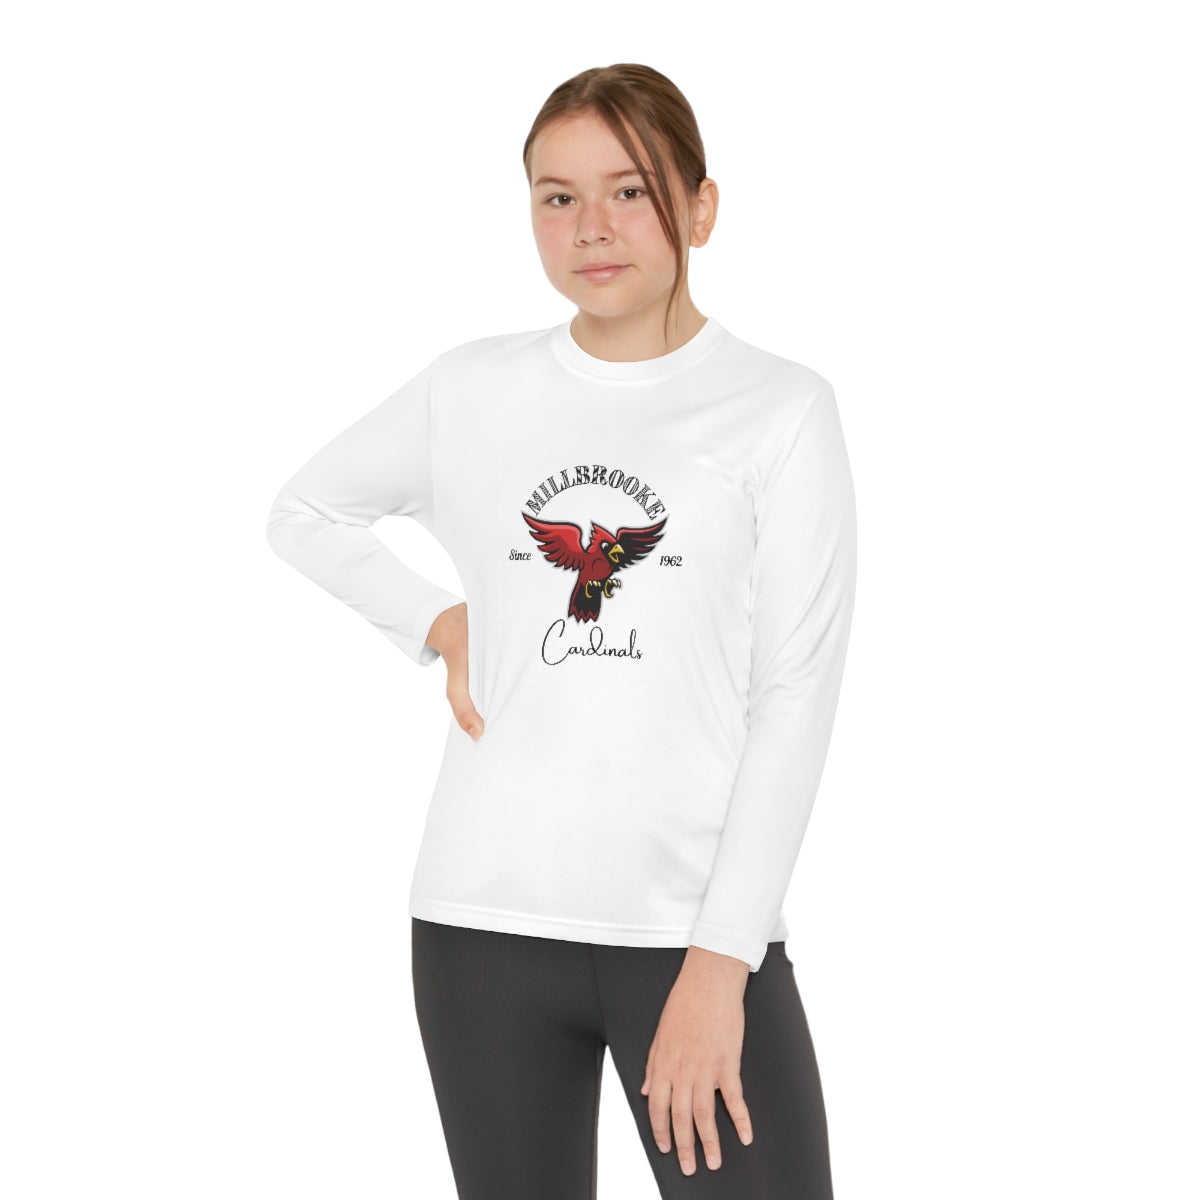 Millbrooke Youth Long Sleeve Competitor Tee - Live Sandy